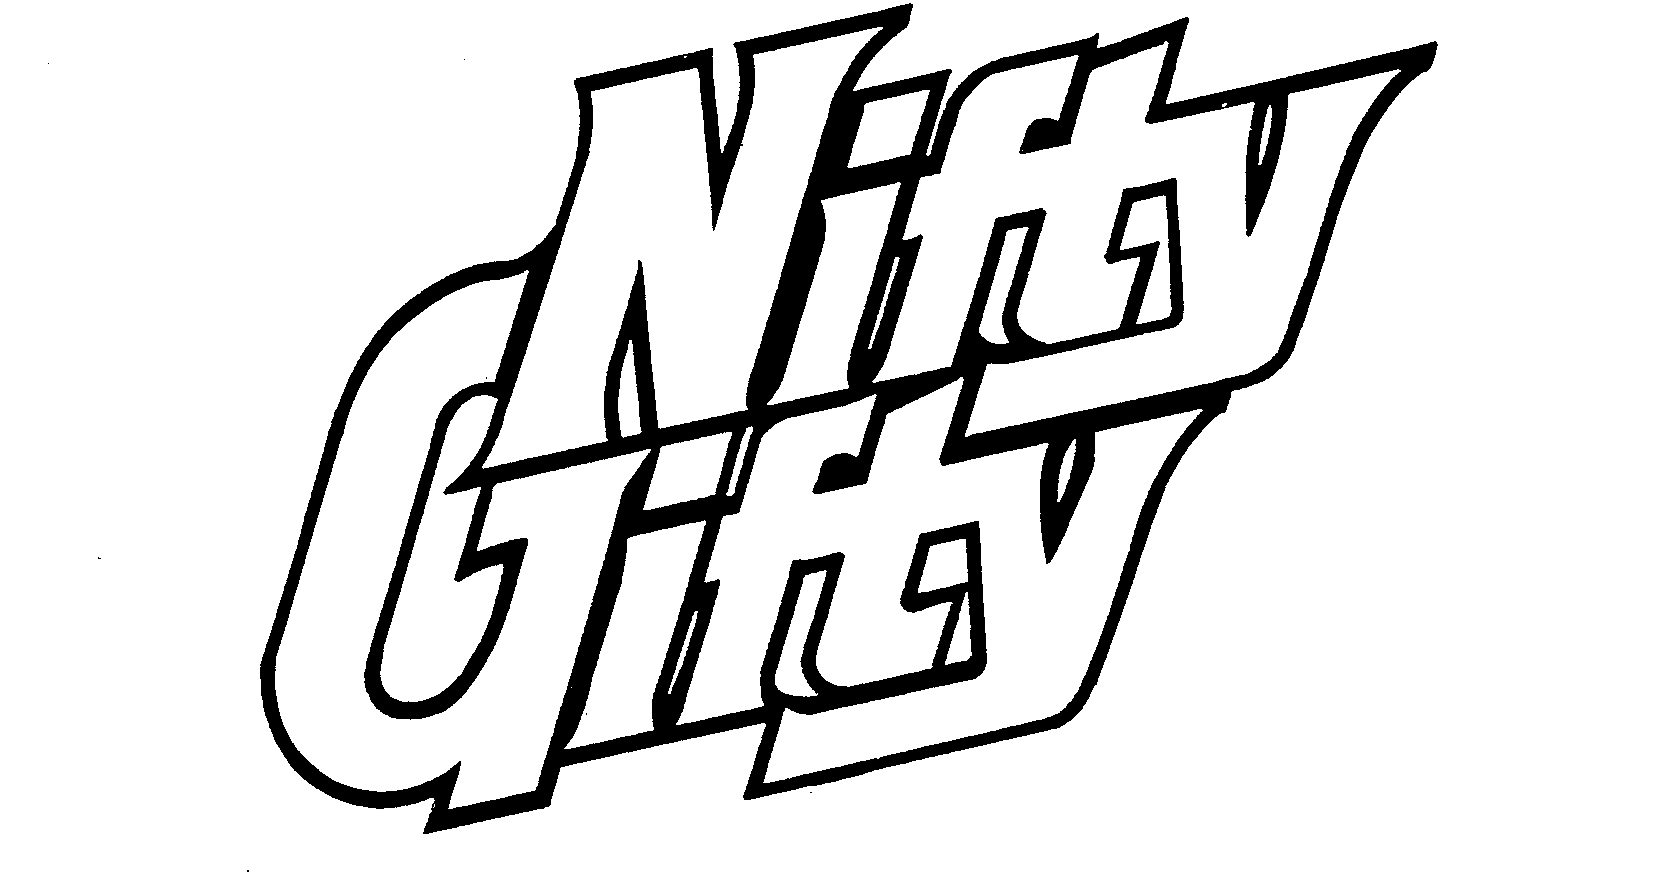 NIFTY GIFTY